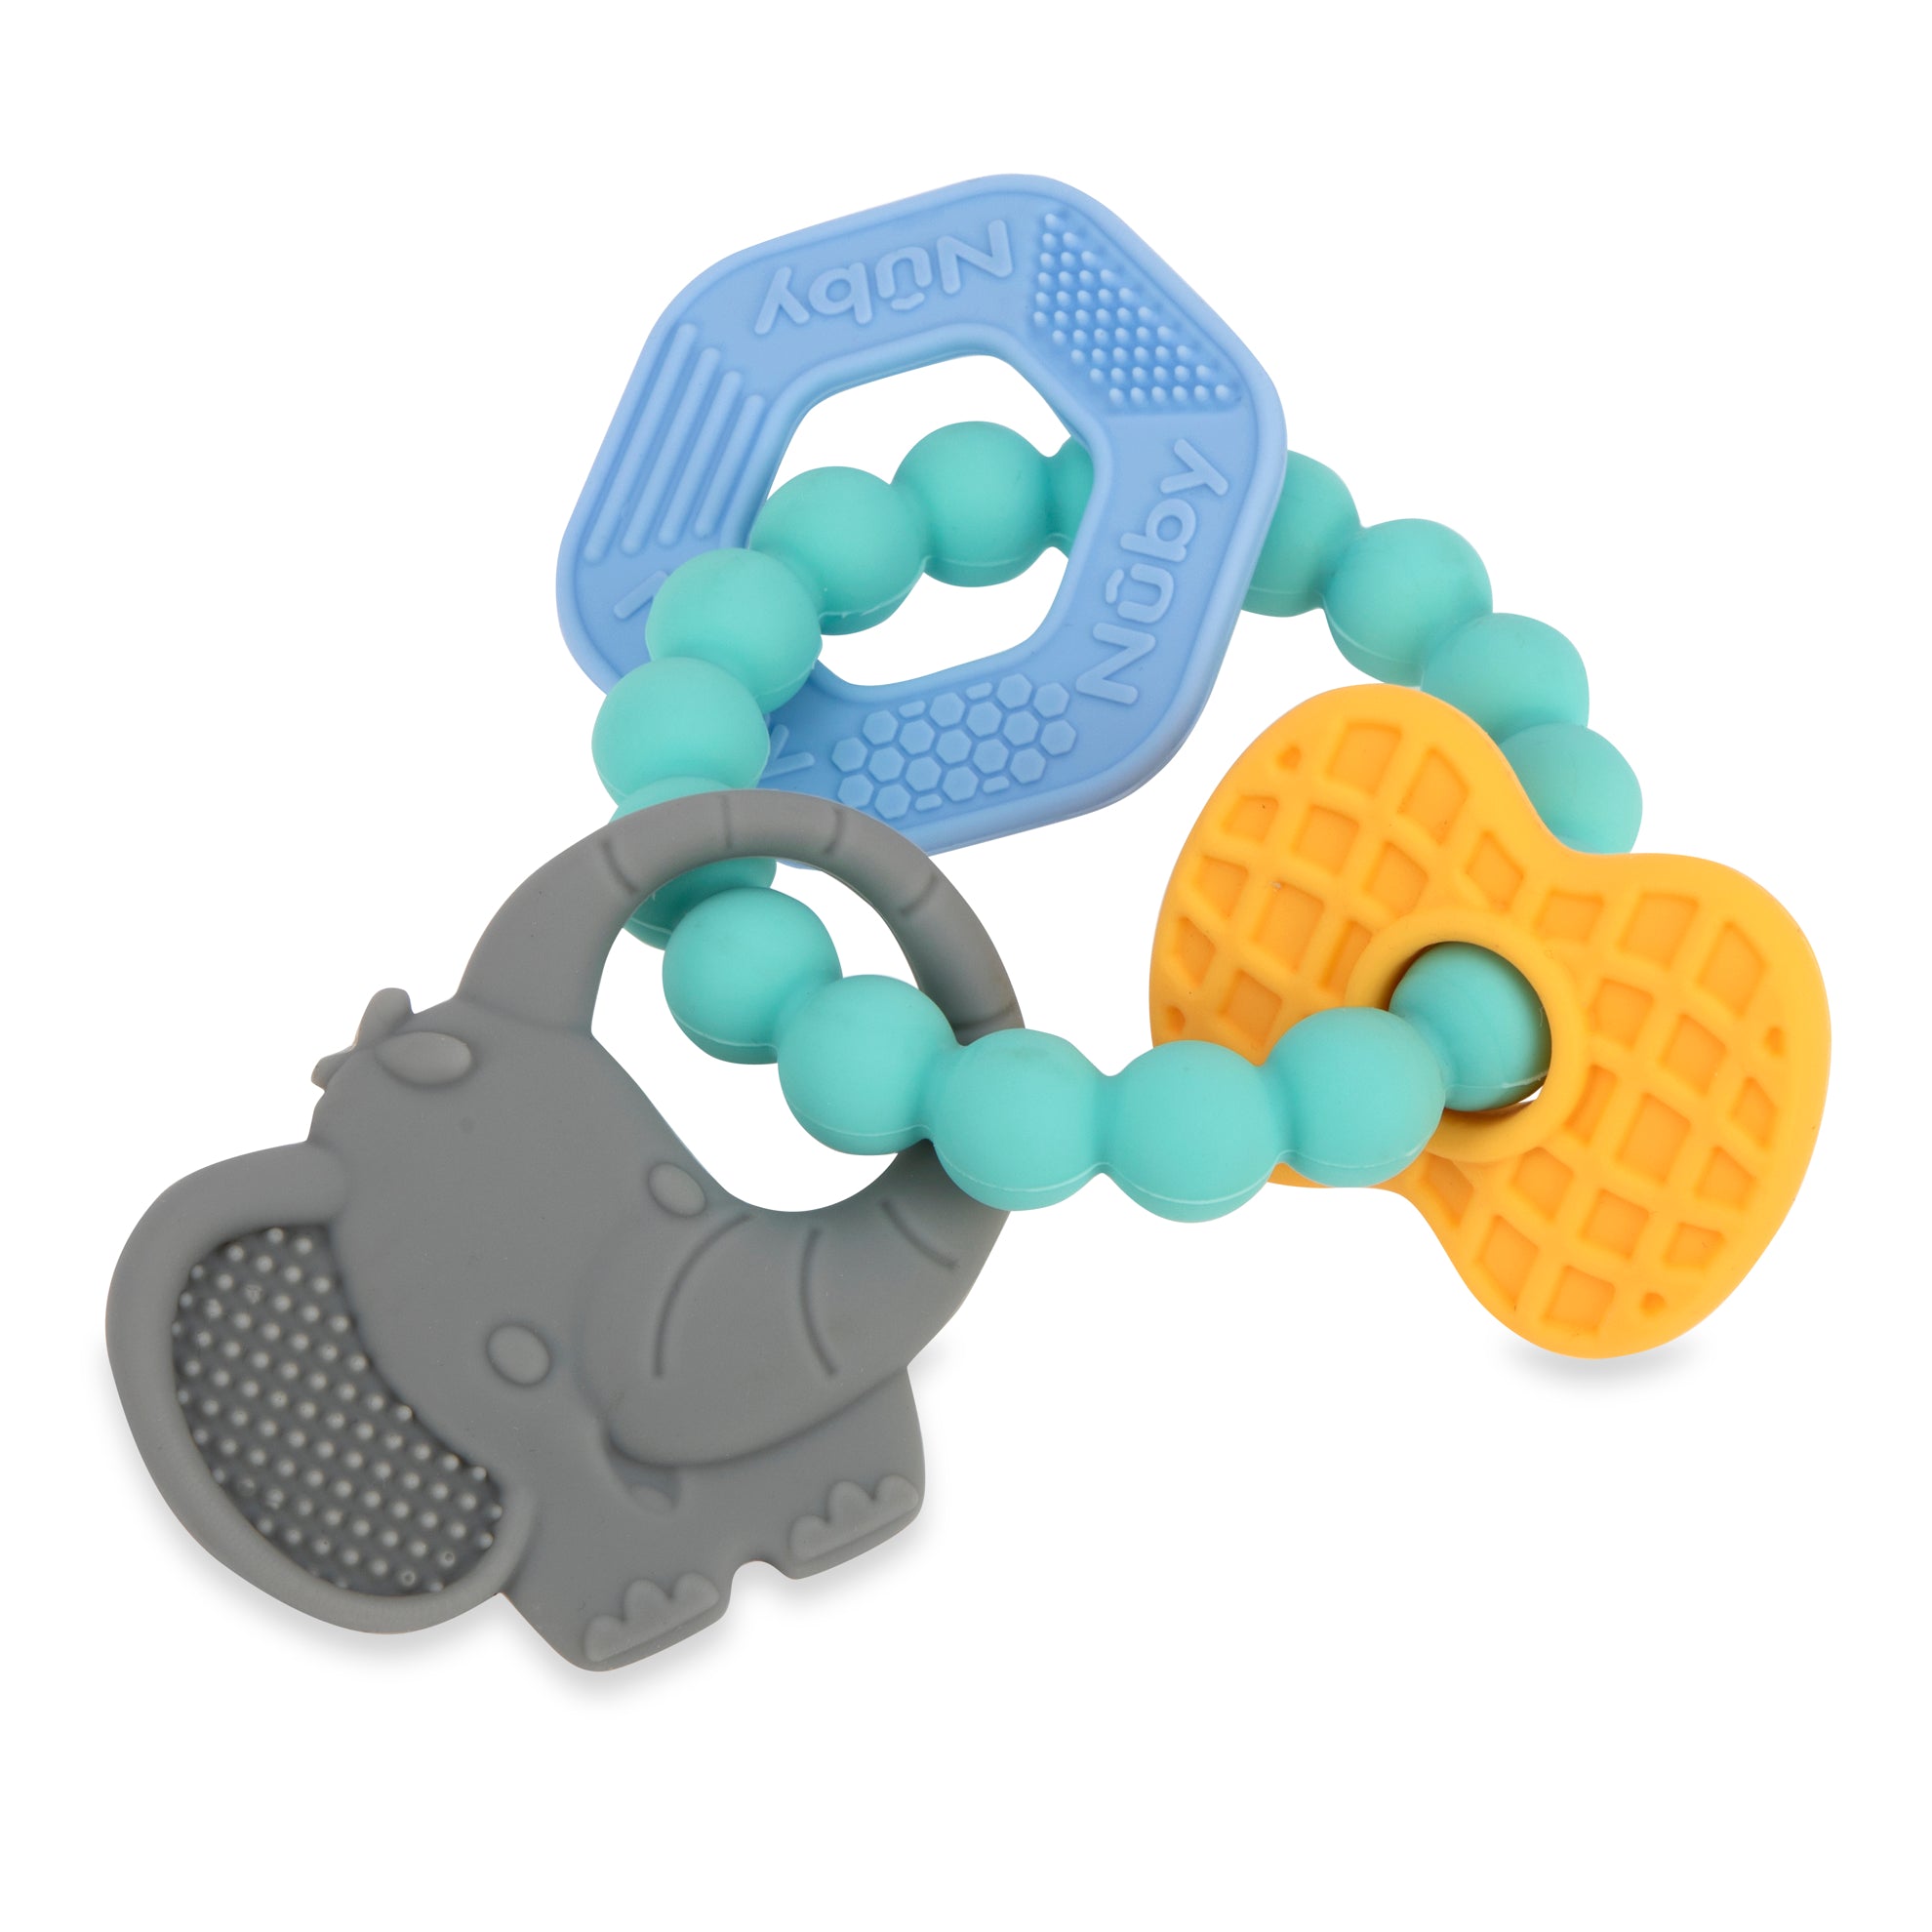 Soft Silicone Chewy Charms Teething Ring – Nuby